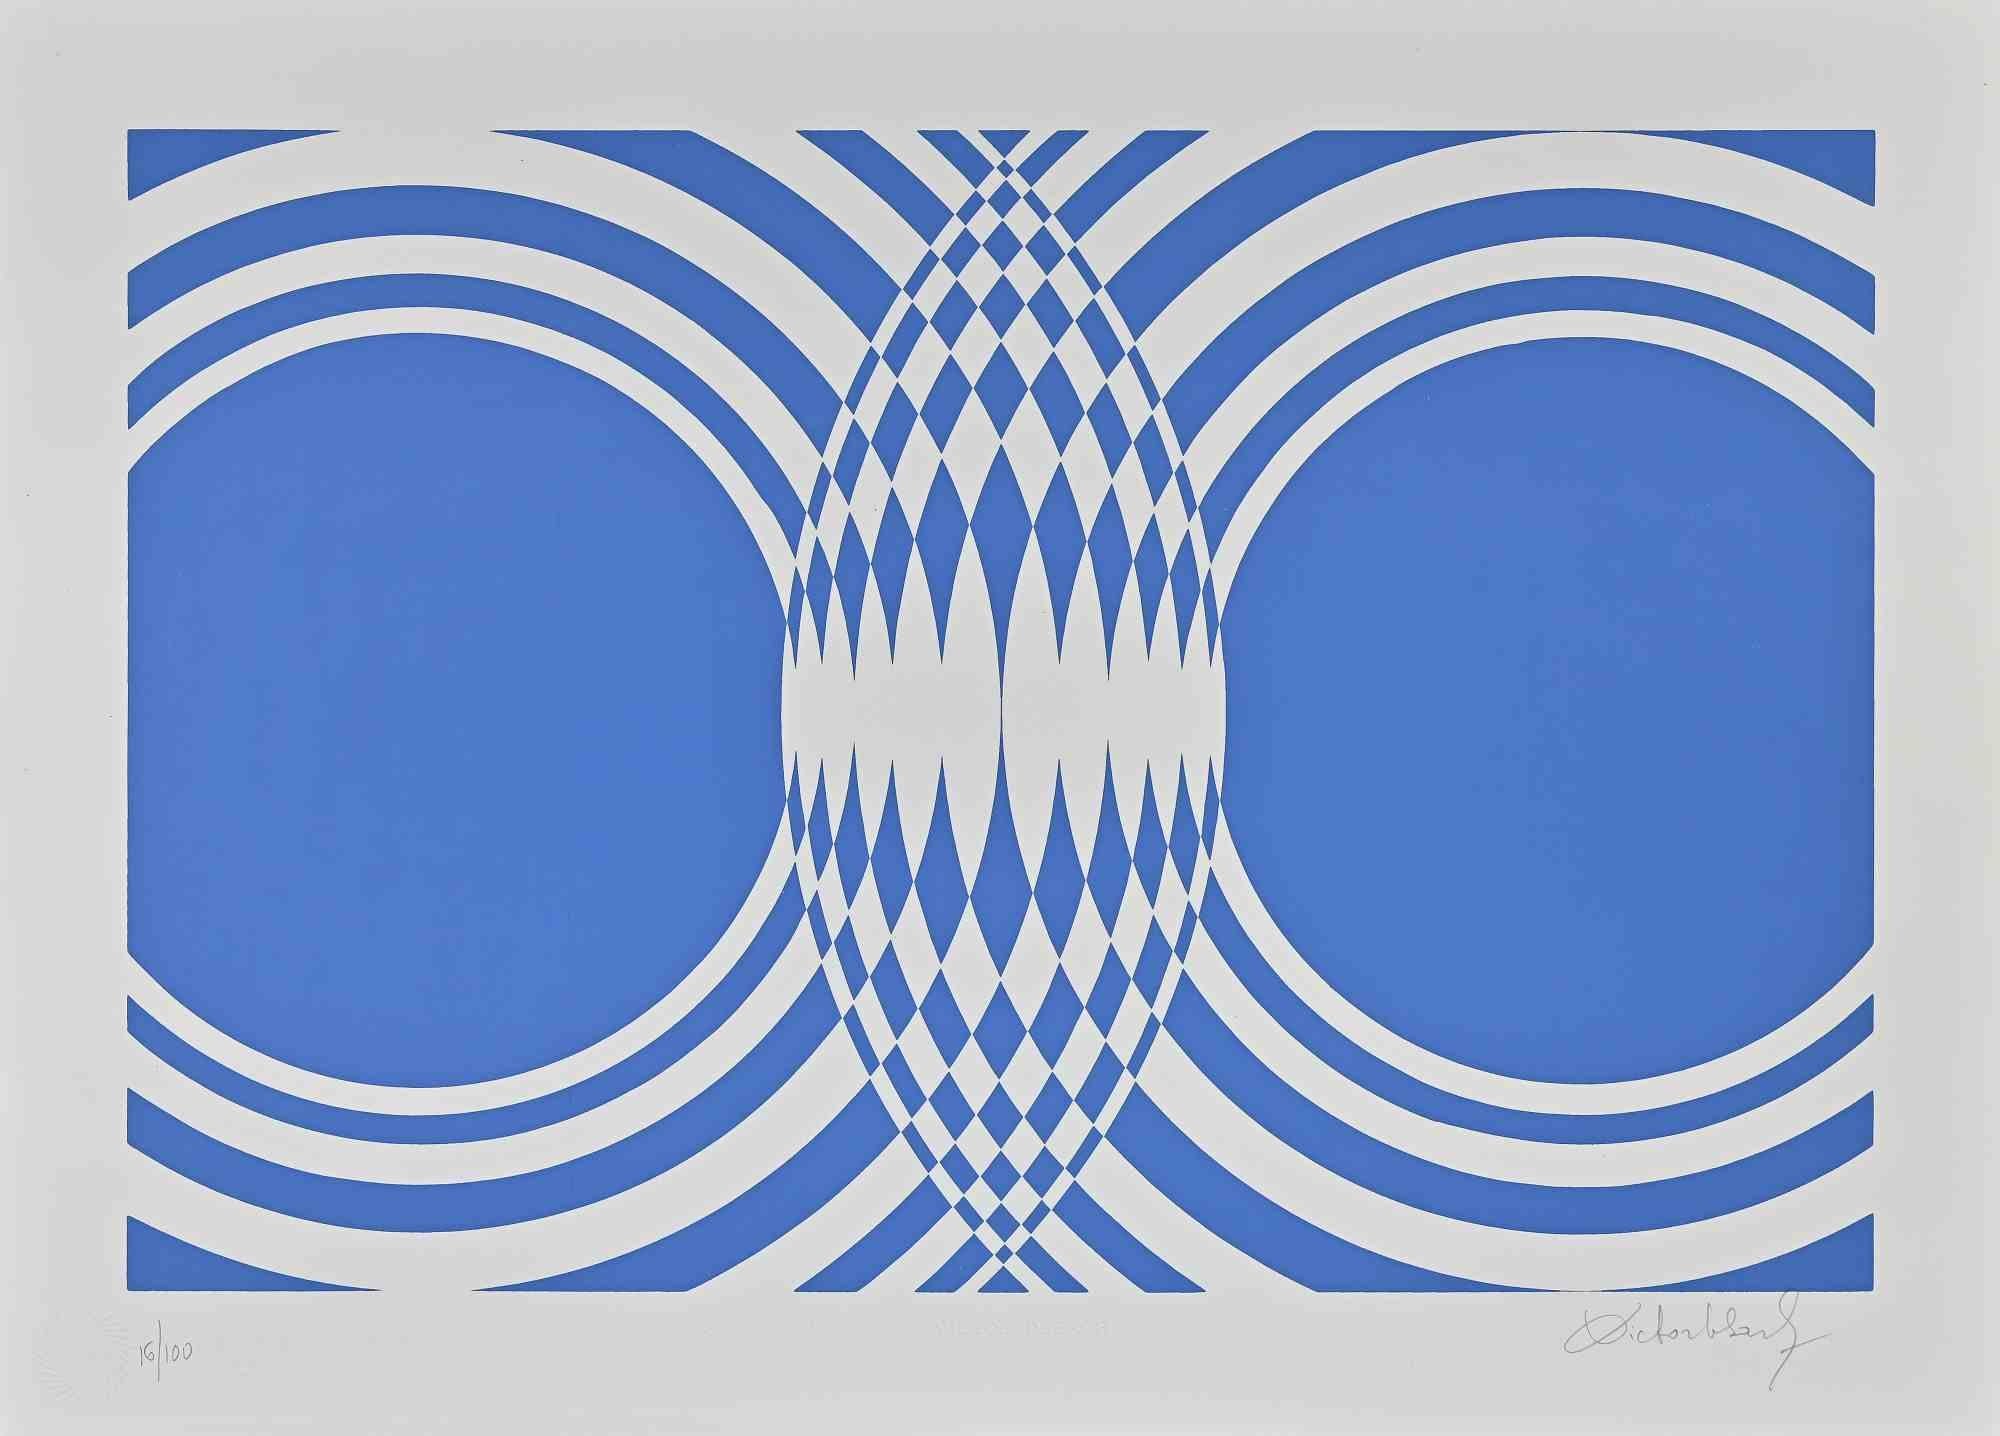 Blue Composition is an original contemporary artwork realized by Victor Debach in the 1970s.

Mixed colored screen print on paper.

Hand signed on the lower right margin.

Numbered on the lower left.

Edition of 16/100